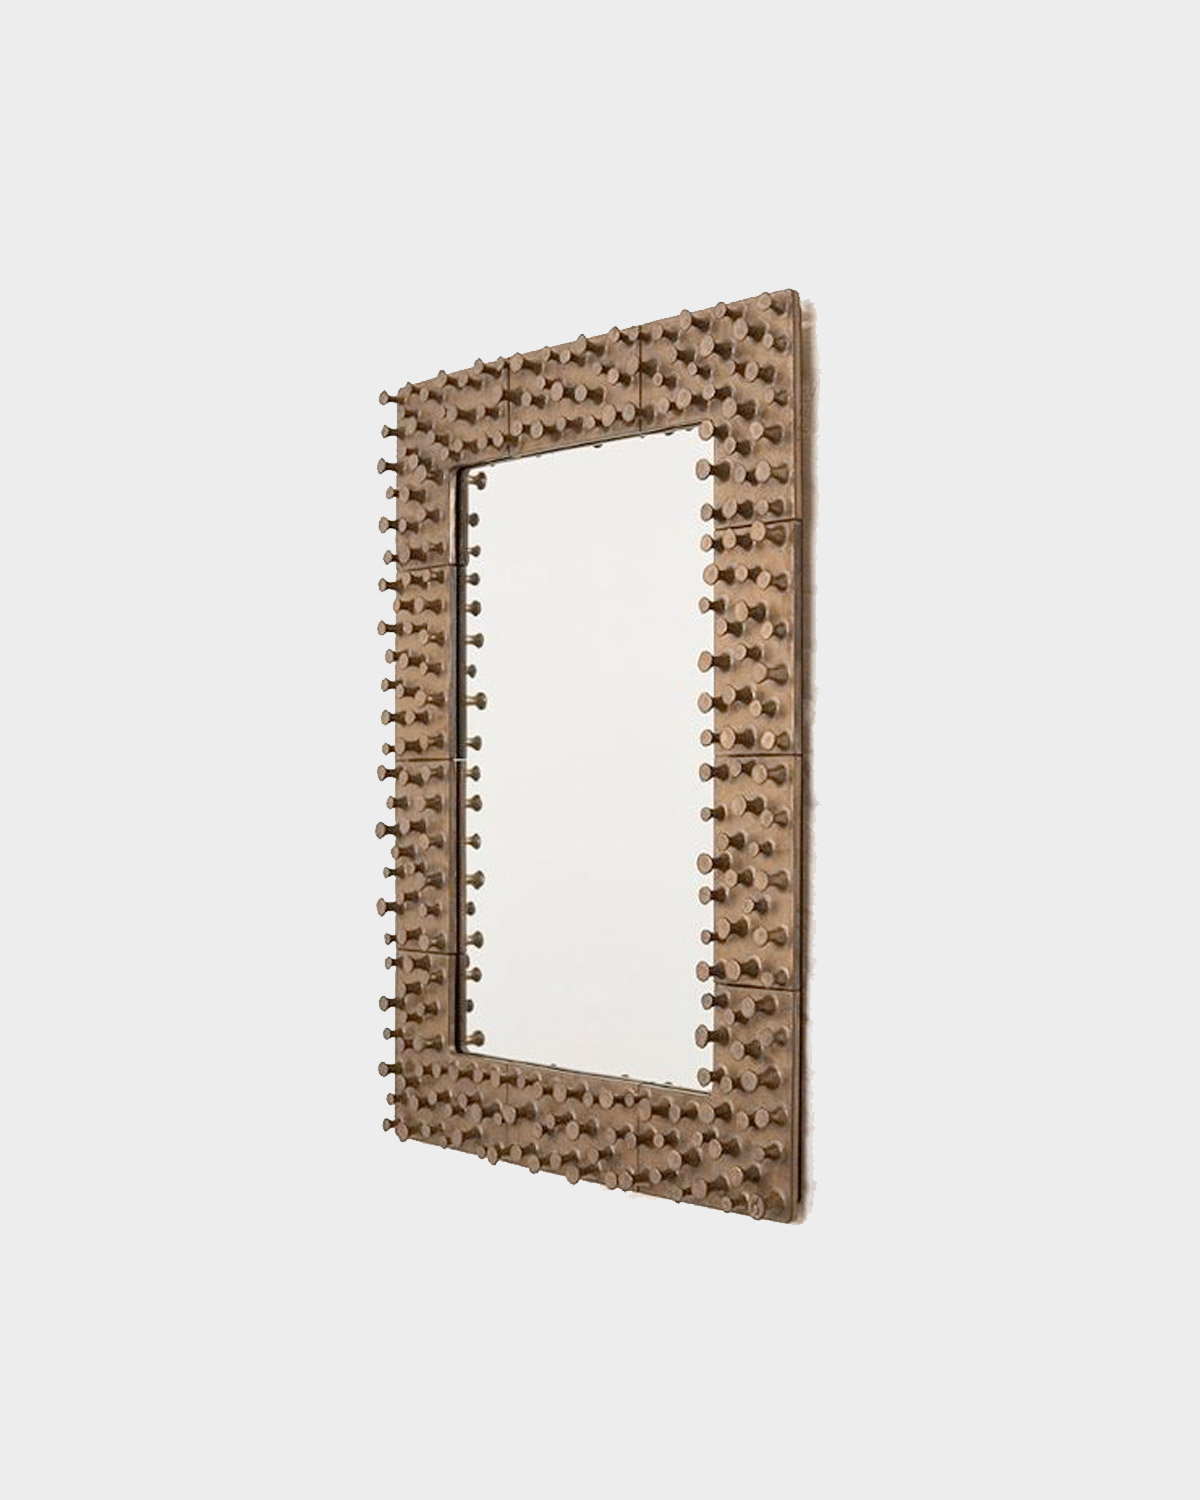 The Lustro Wall Mirror by Pamela Sunday